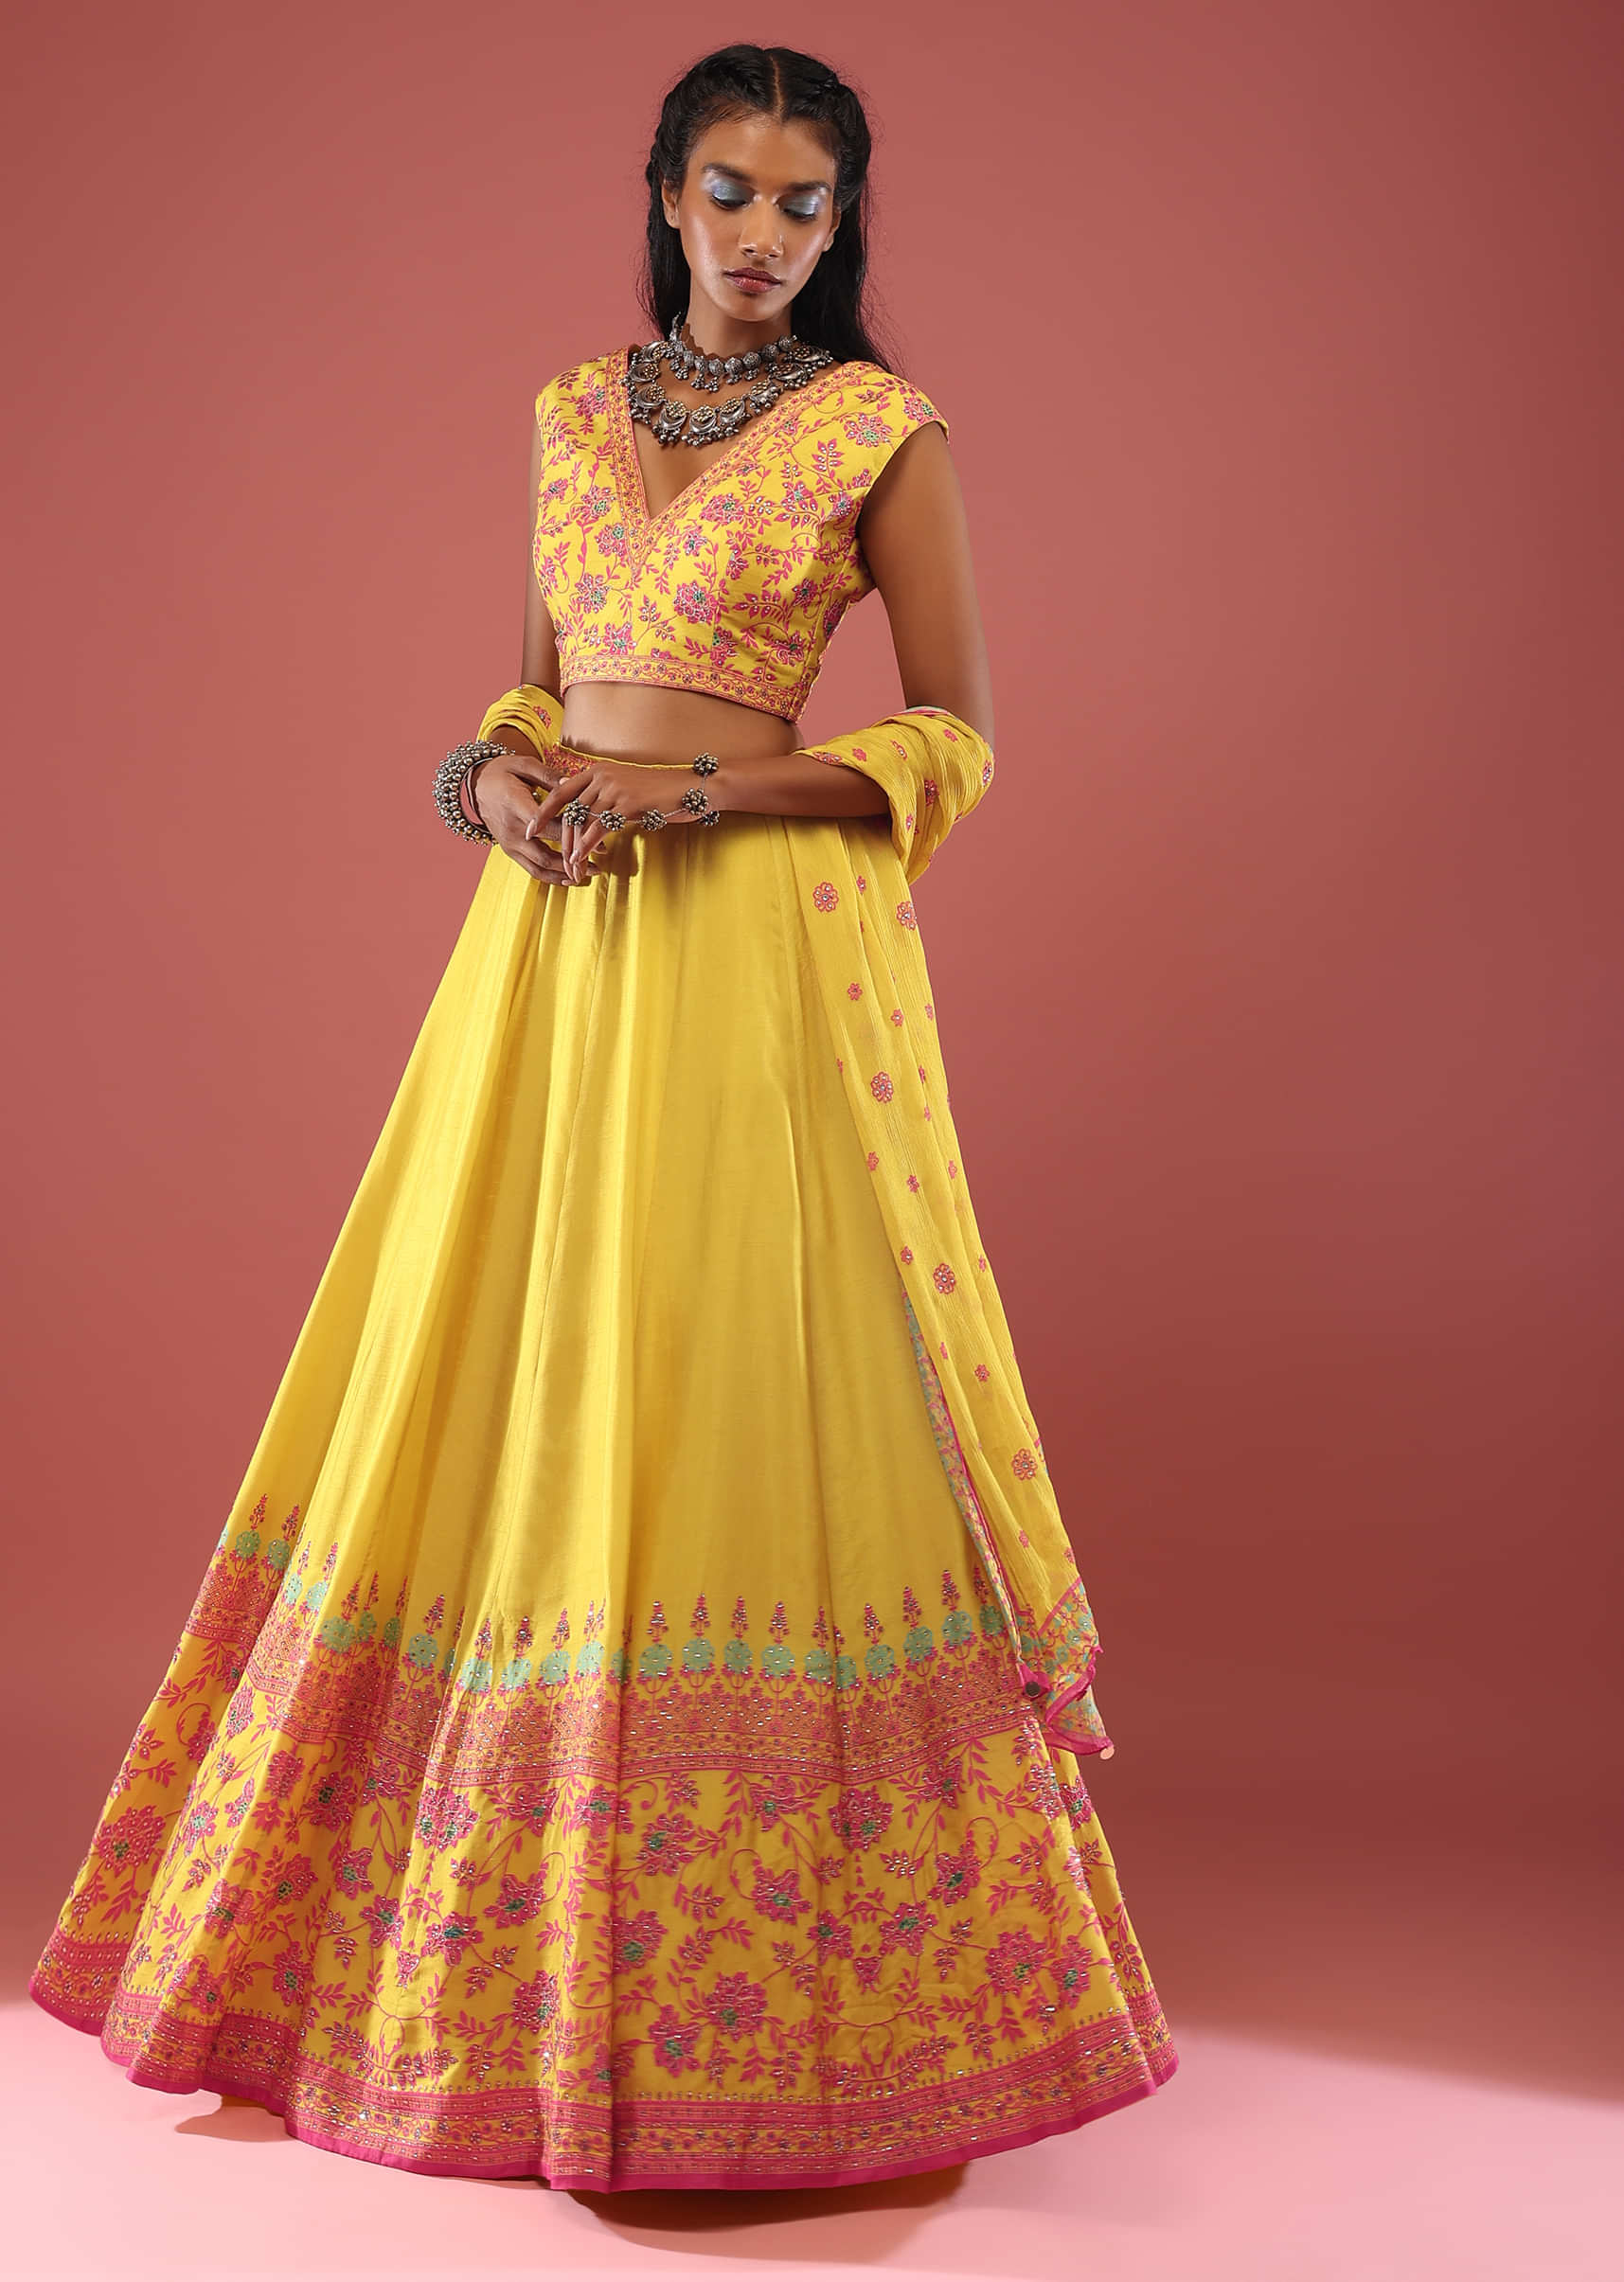 Green Sleeveless Blouse With Colourful Stone Embellishments Paired With Flowy Skirt With Floral Prints And Chiffon Dupatta